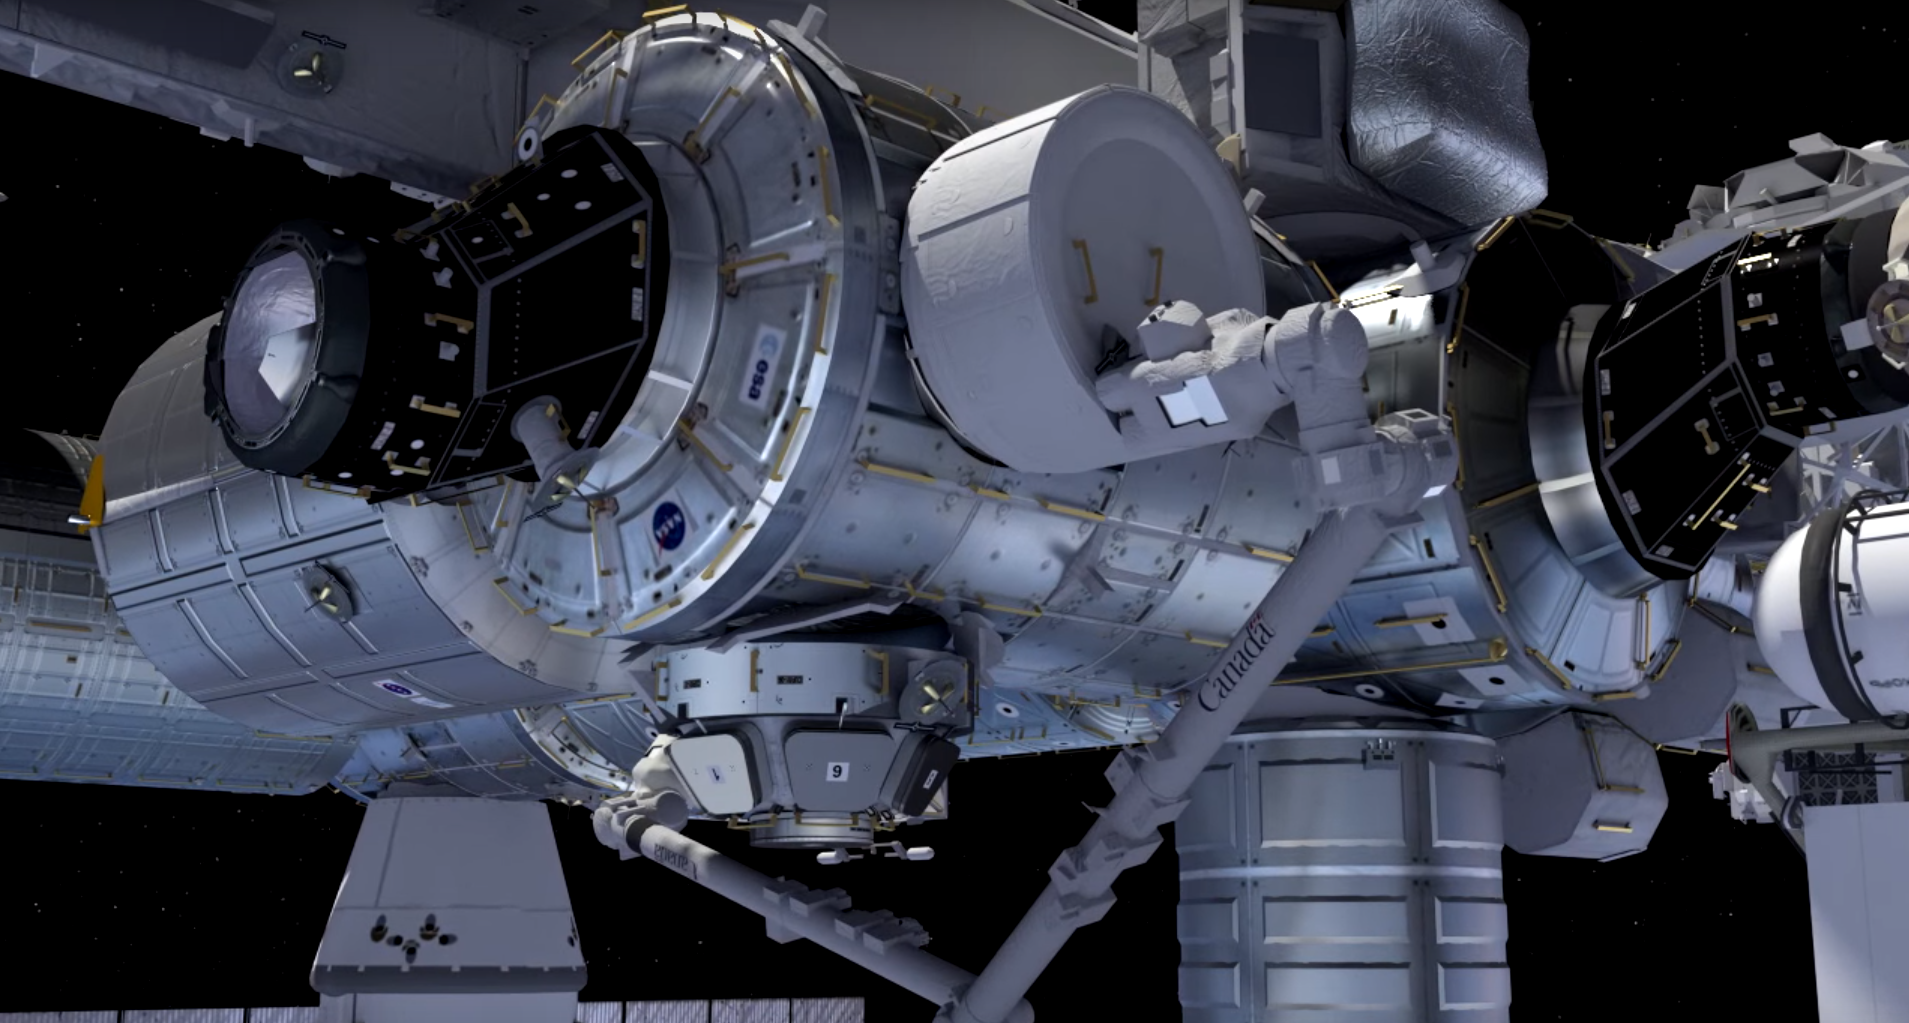 Installation of the Bigelow Expandable Activity Module on the International Space Station